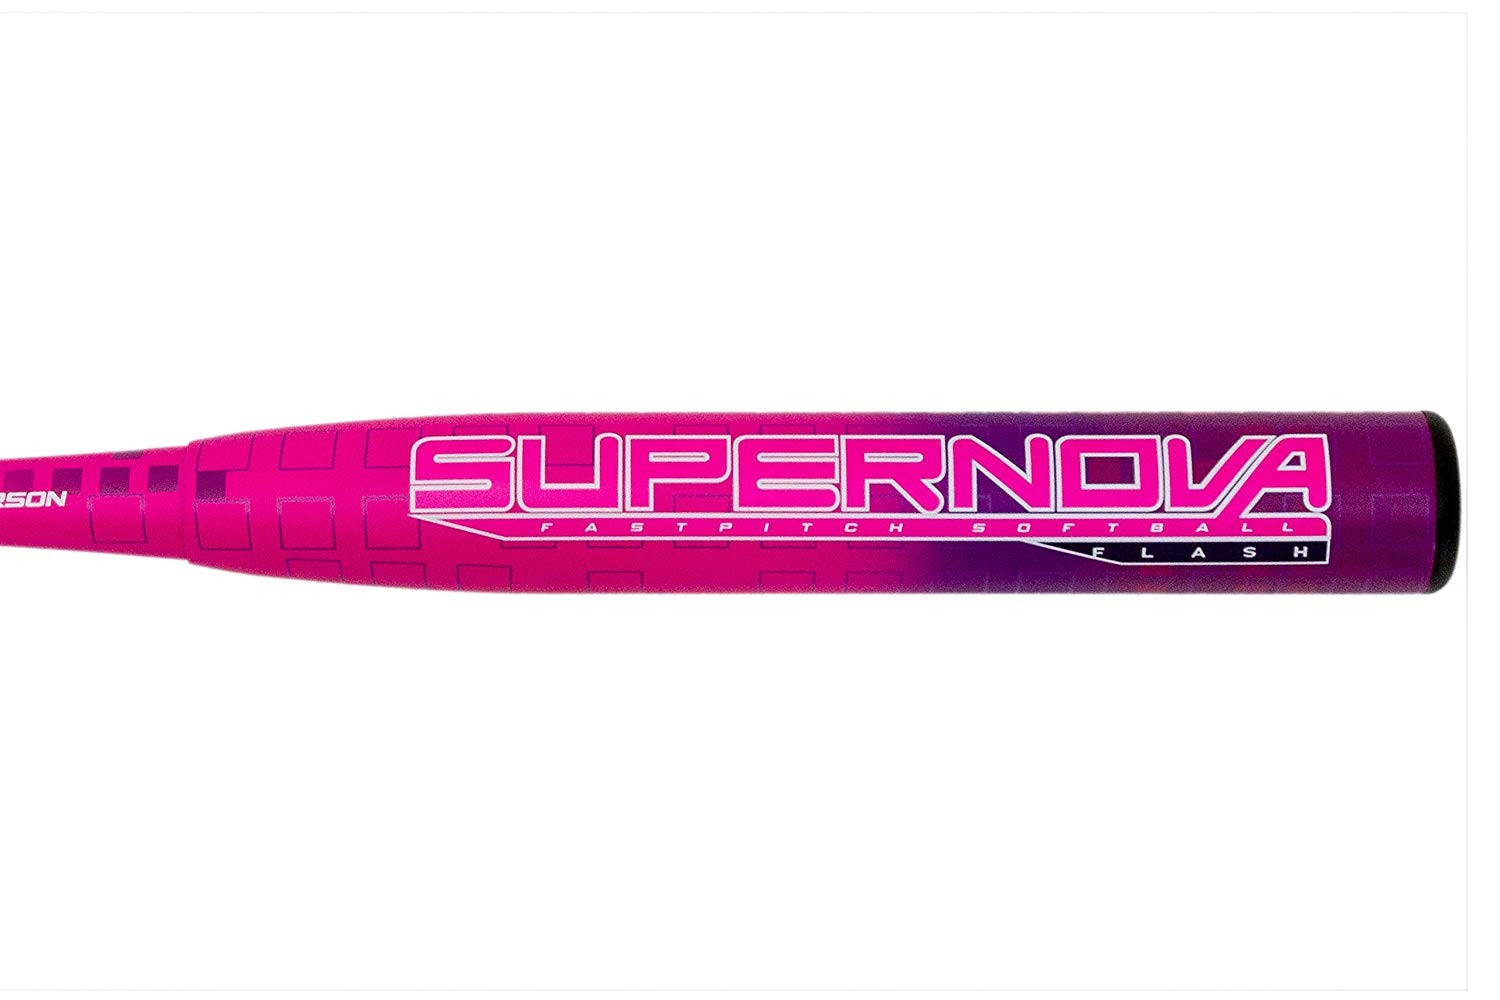 anderson-2019-supernova-flash-11-fastpitch-softball-bat-30-in-19-oz 017040-3019 Anderson 874147009307 2 ¼” Barrel -11 Drop Weight Two-piece composite design eliminates stings